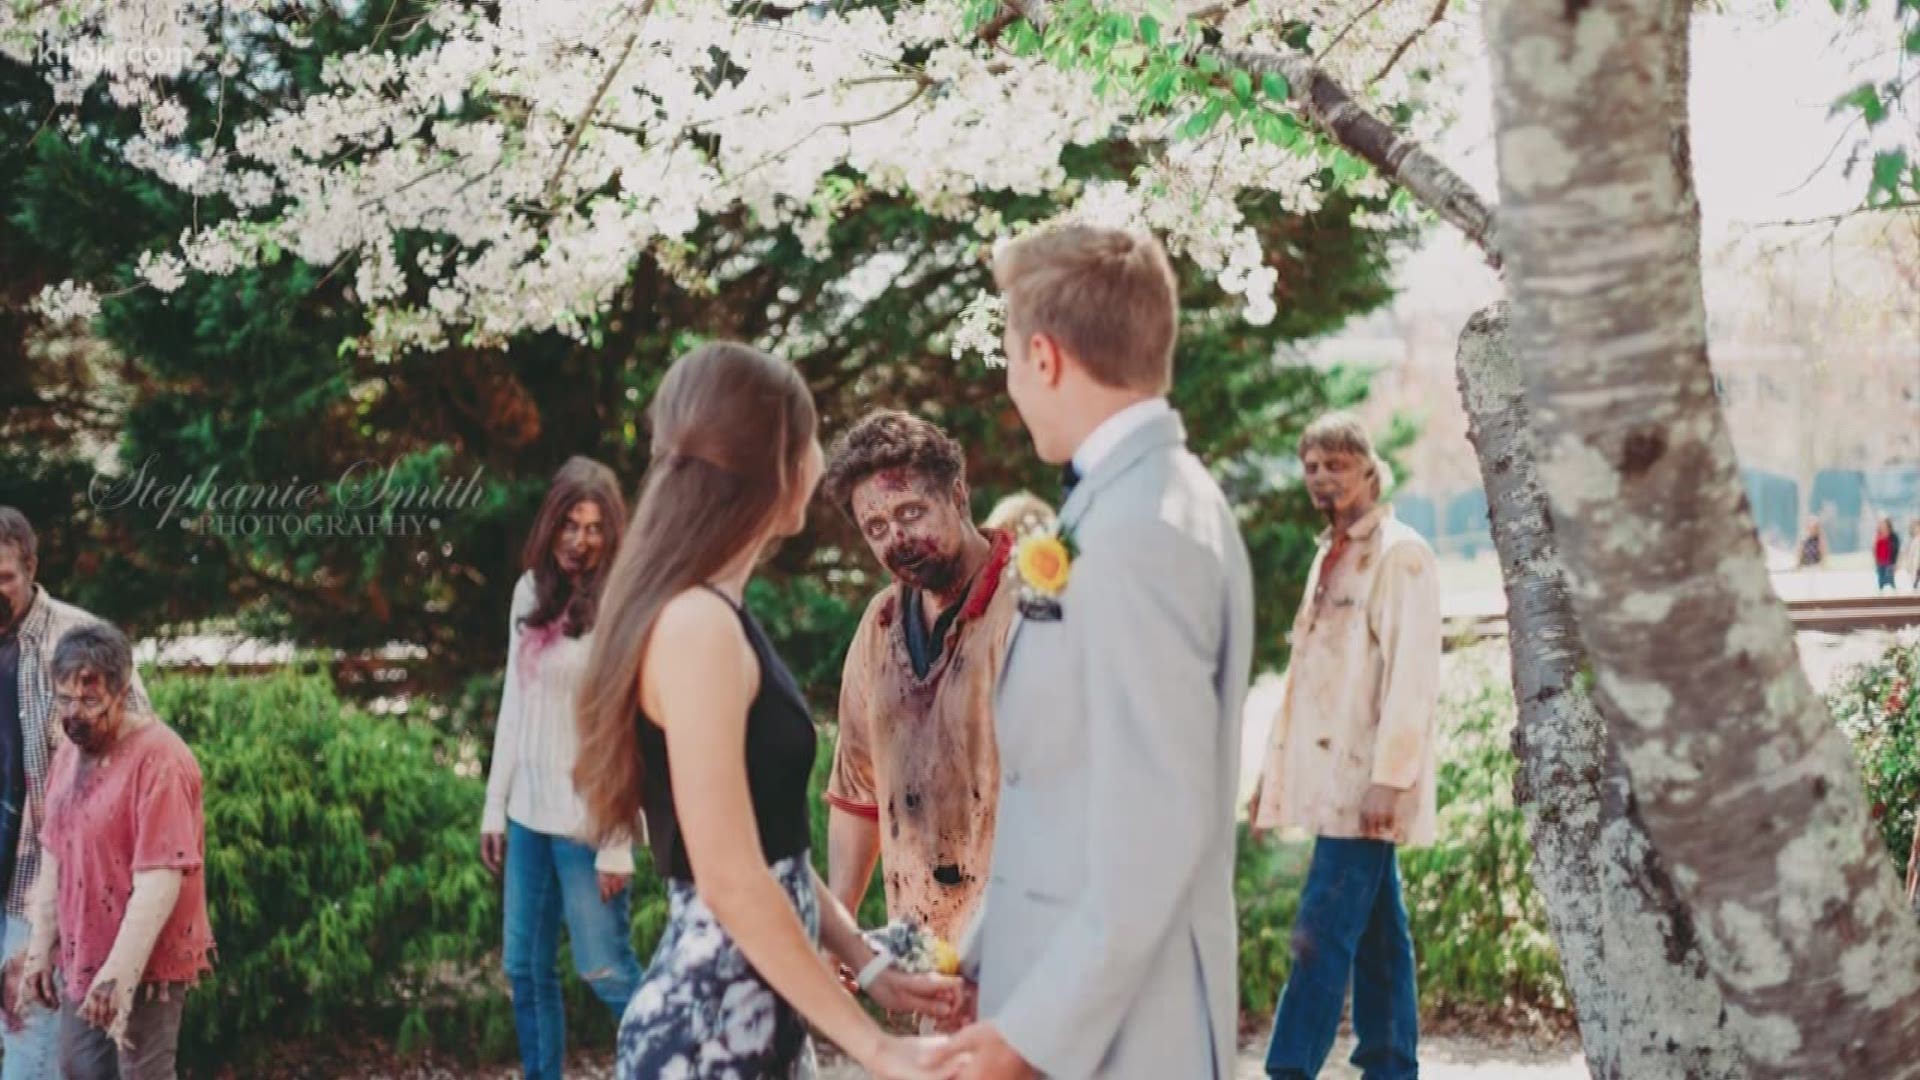 A young couple chose a lovely path lined with dogwood trees in Senoia, Georgia for their prom pictures. They ended up with something much better.